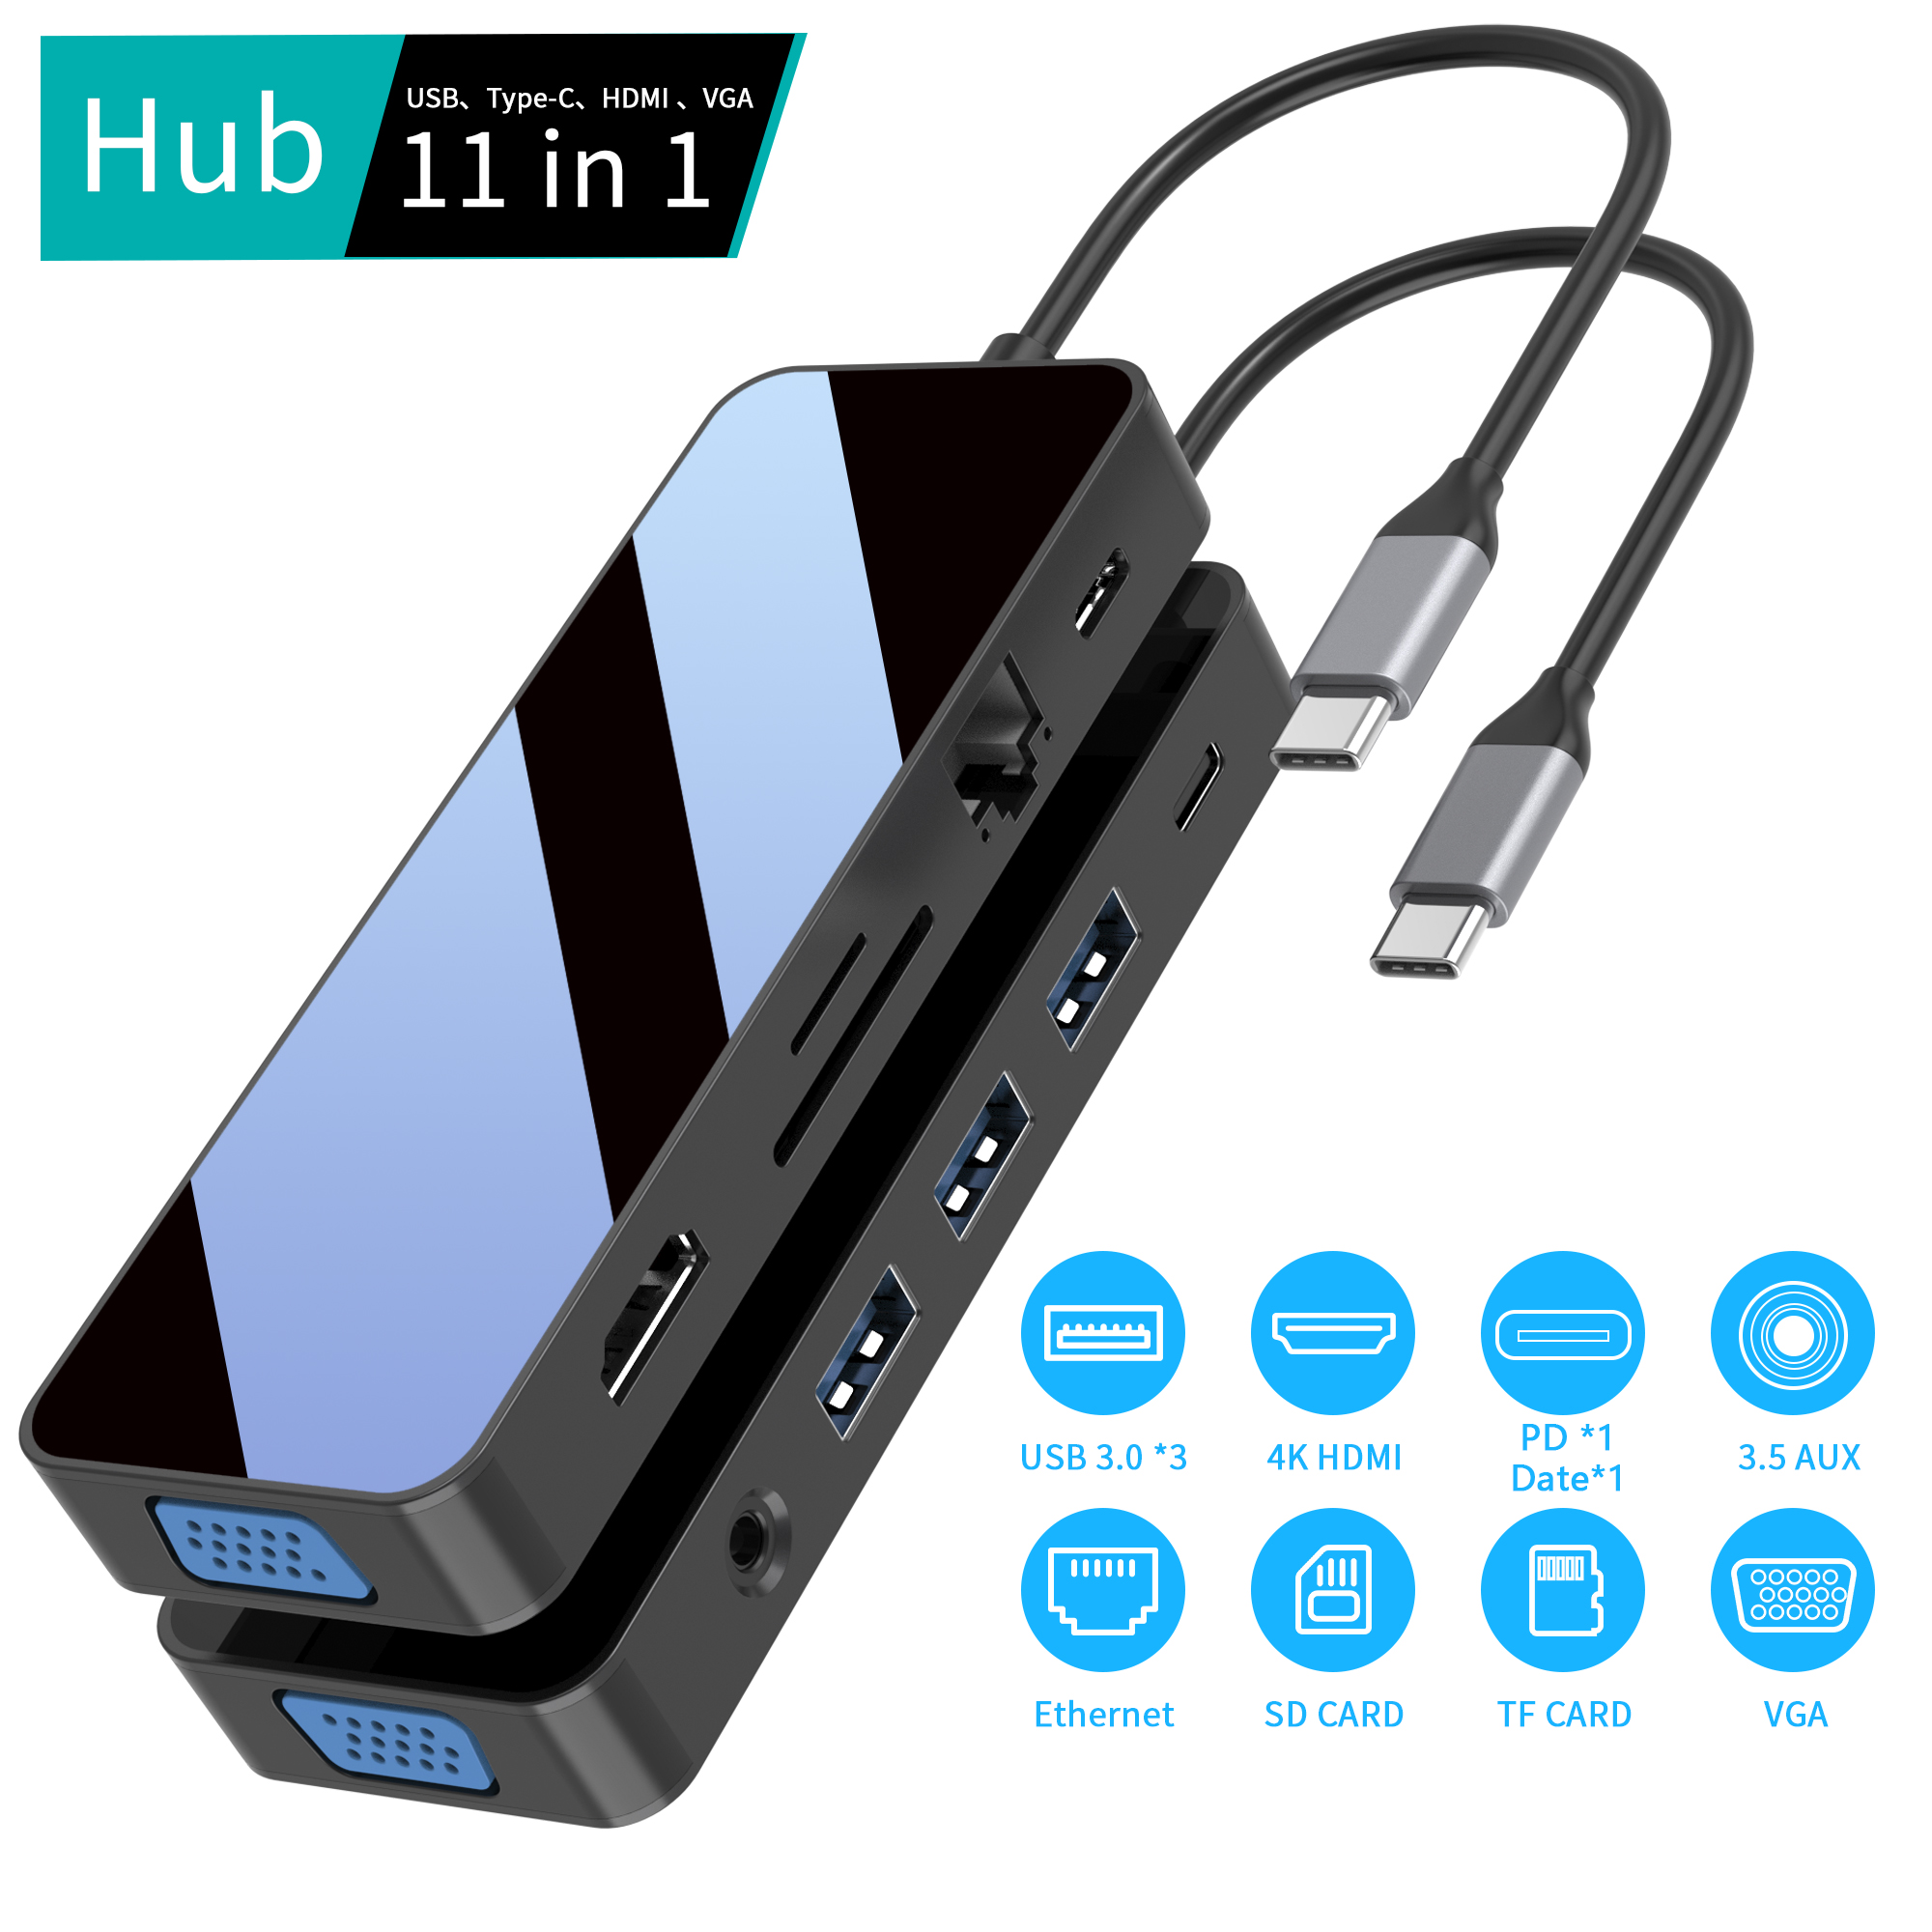 Mirror face 11 IN 1 usb c hubs with HDMI + VGA + PD + Type C Data + 3xUSB A 3.0 + RJ45 1000Mbps + 3.5mm AUX + SD + TF card reader multi port docking station for laptop/pc